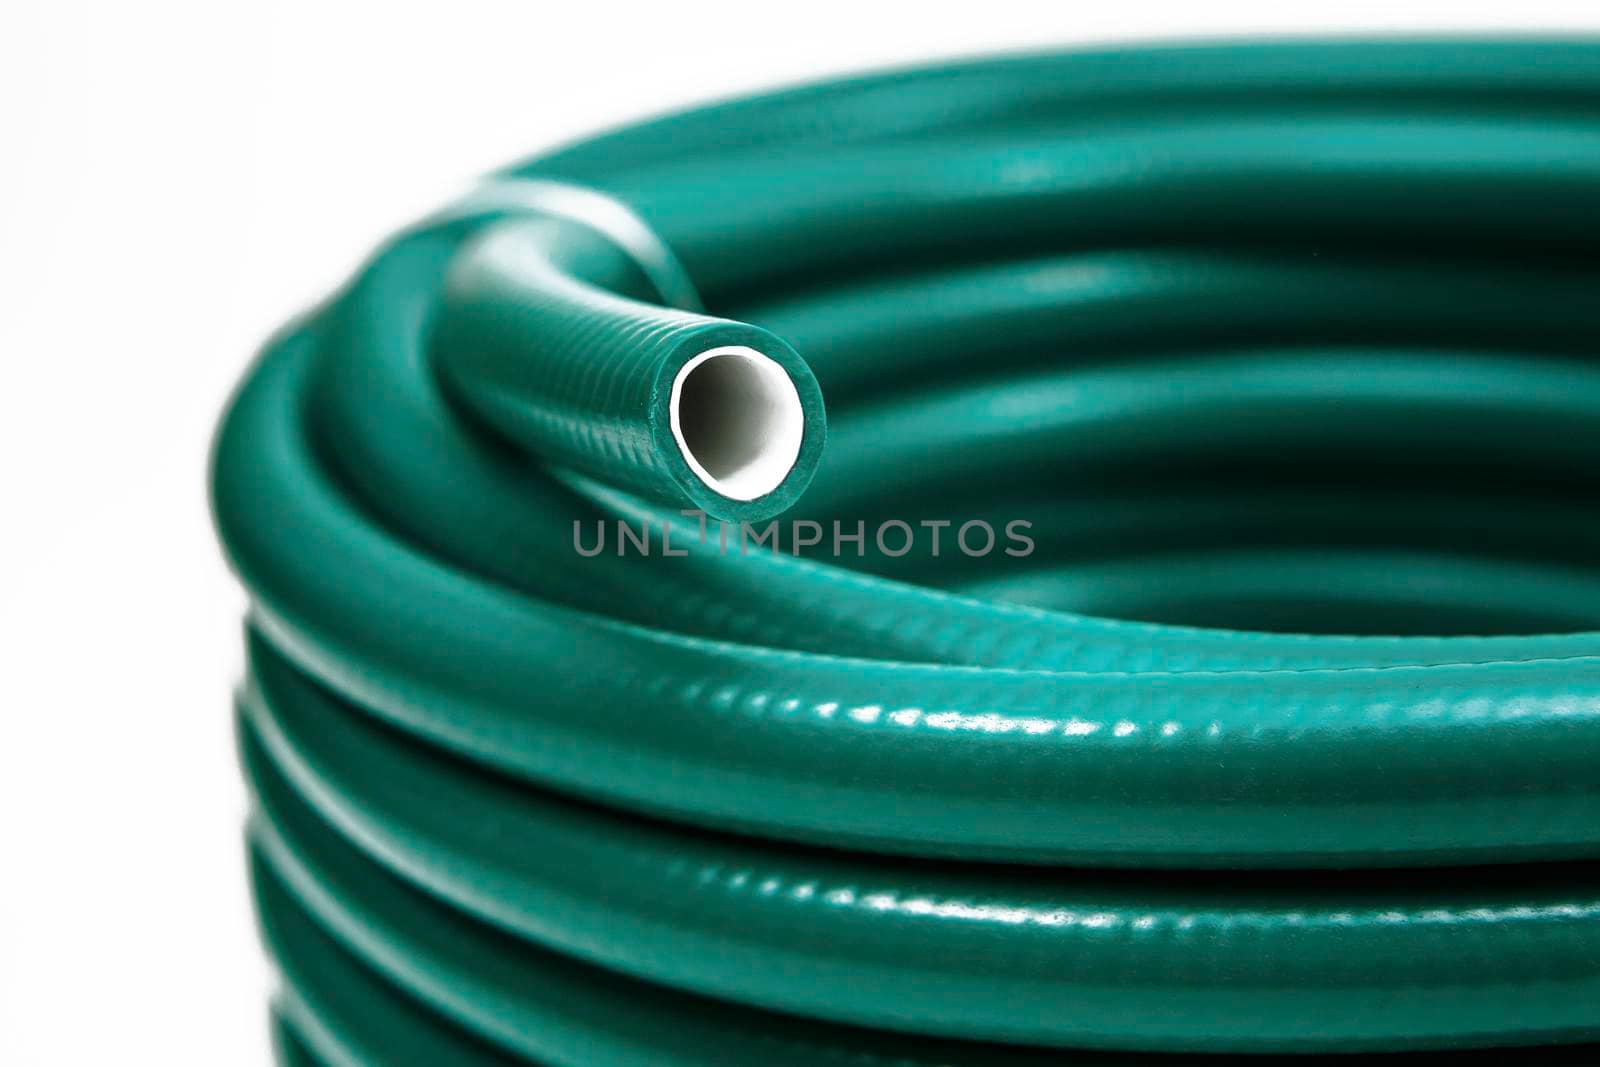 Hose wrapped in a bobbin and fastened with a plastic lock